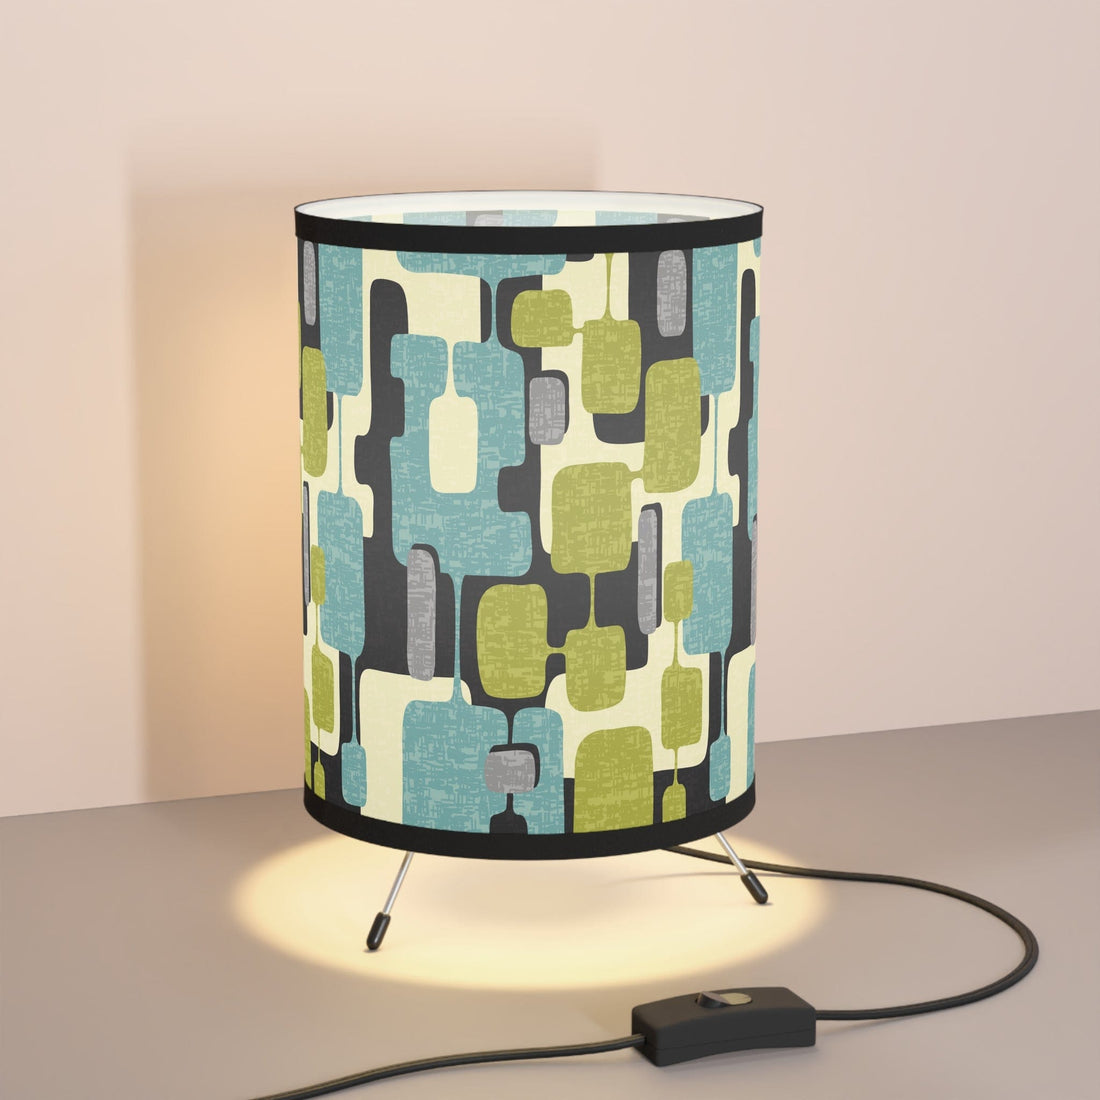 Kate McEnroe New York Mid Century Modern Abstract Tripod Lamp, Retro Teal, Lime Green, Gray, Black MCM Desk Lamp, Vintage Style Geometric Accent LampLamps23244726713903750746